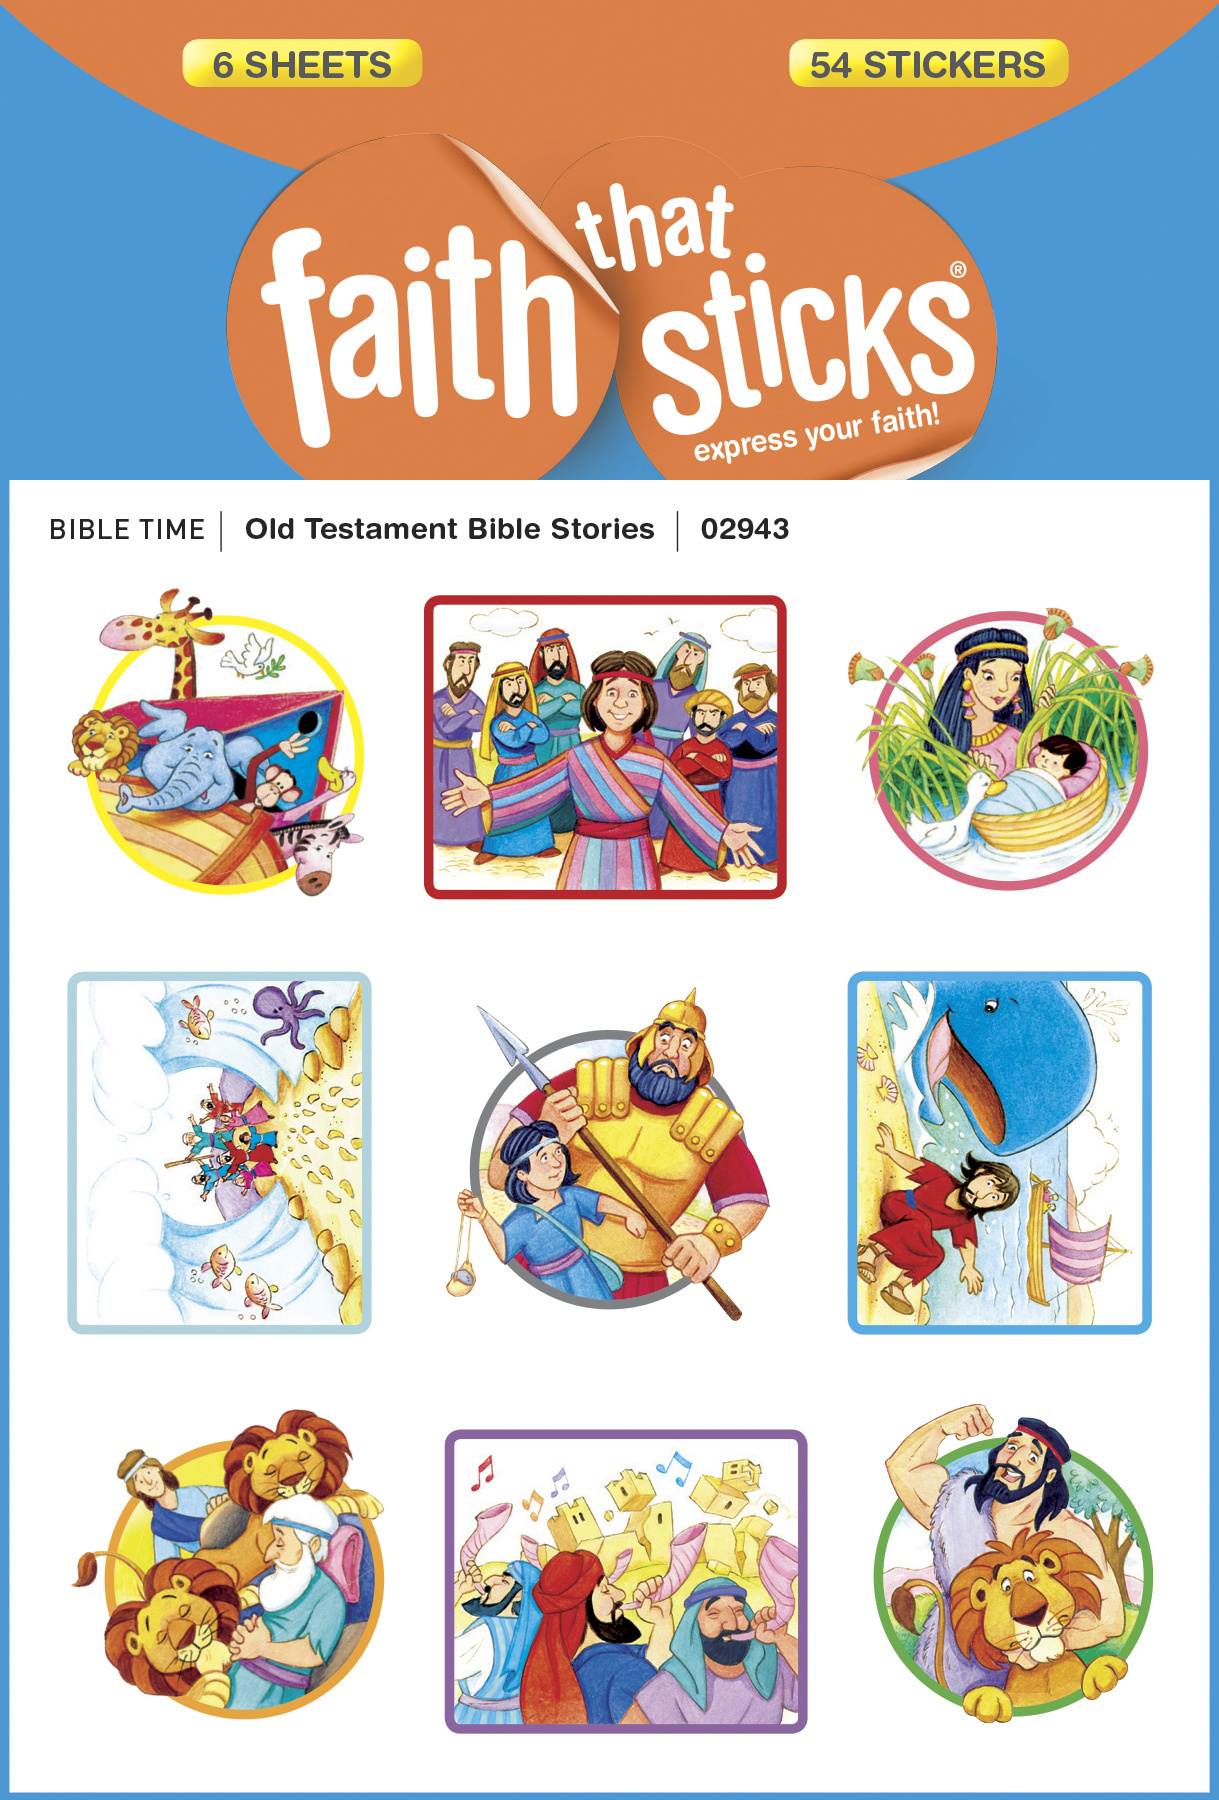 Old Testament Bible Stories Free Delivery When You Spend £10 Uk